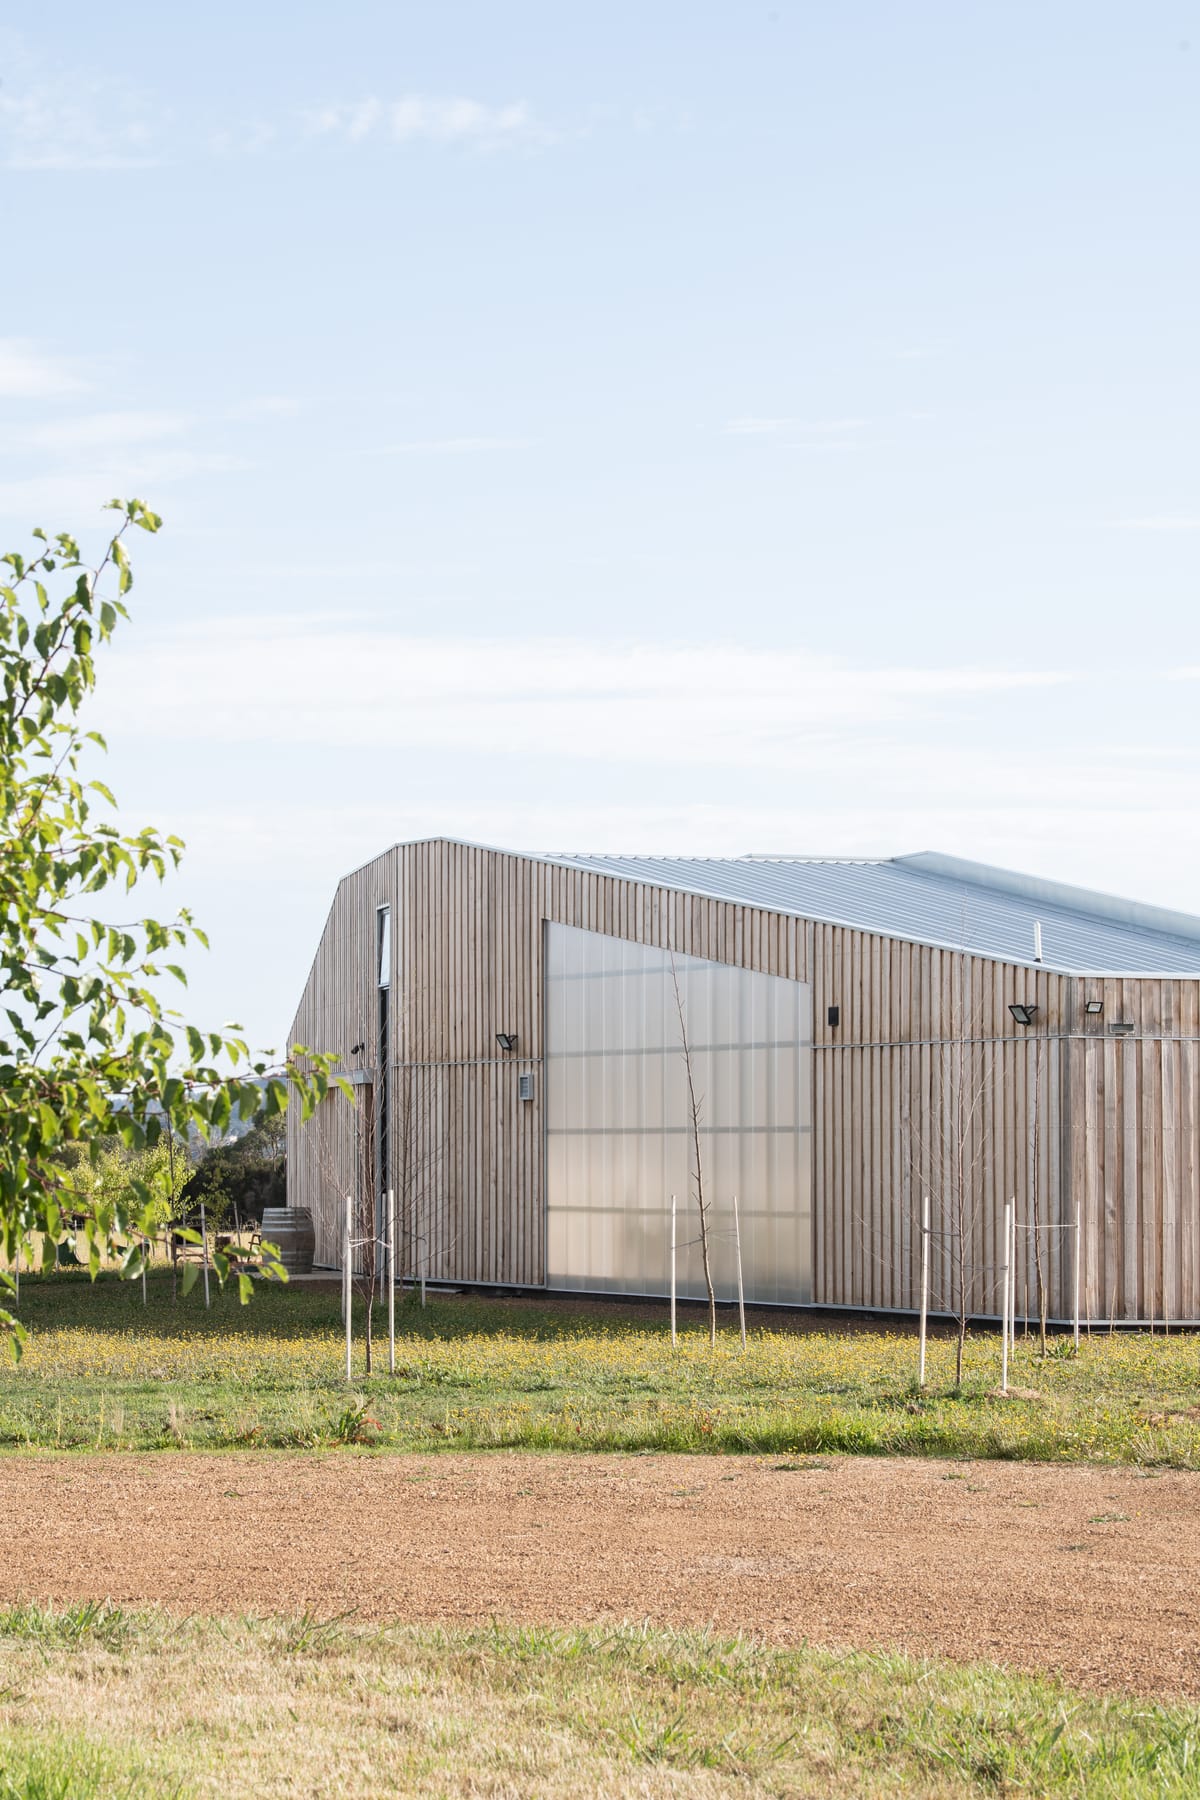 Exterior view of Westella Vineyard's building with a corrugated metal roof, blending modern and rustic design elements.